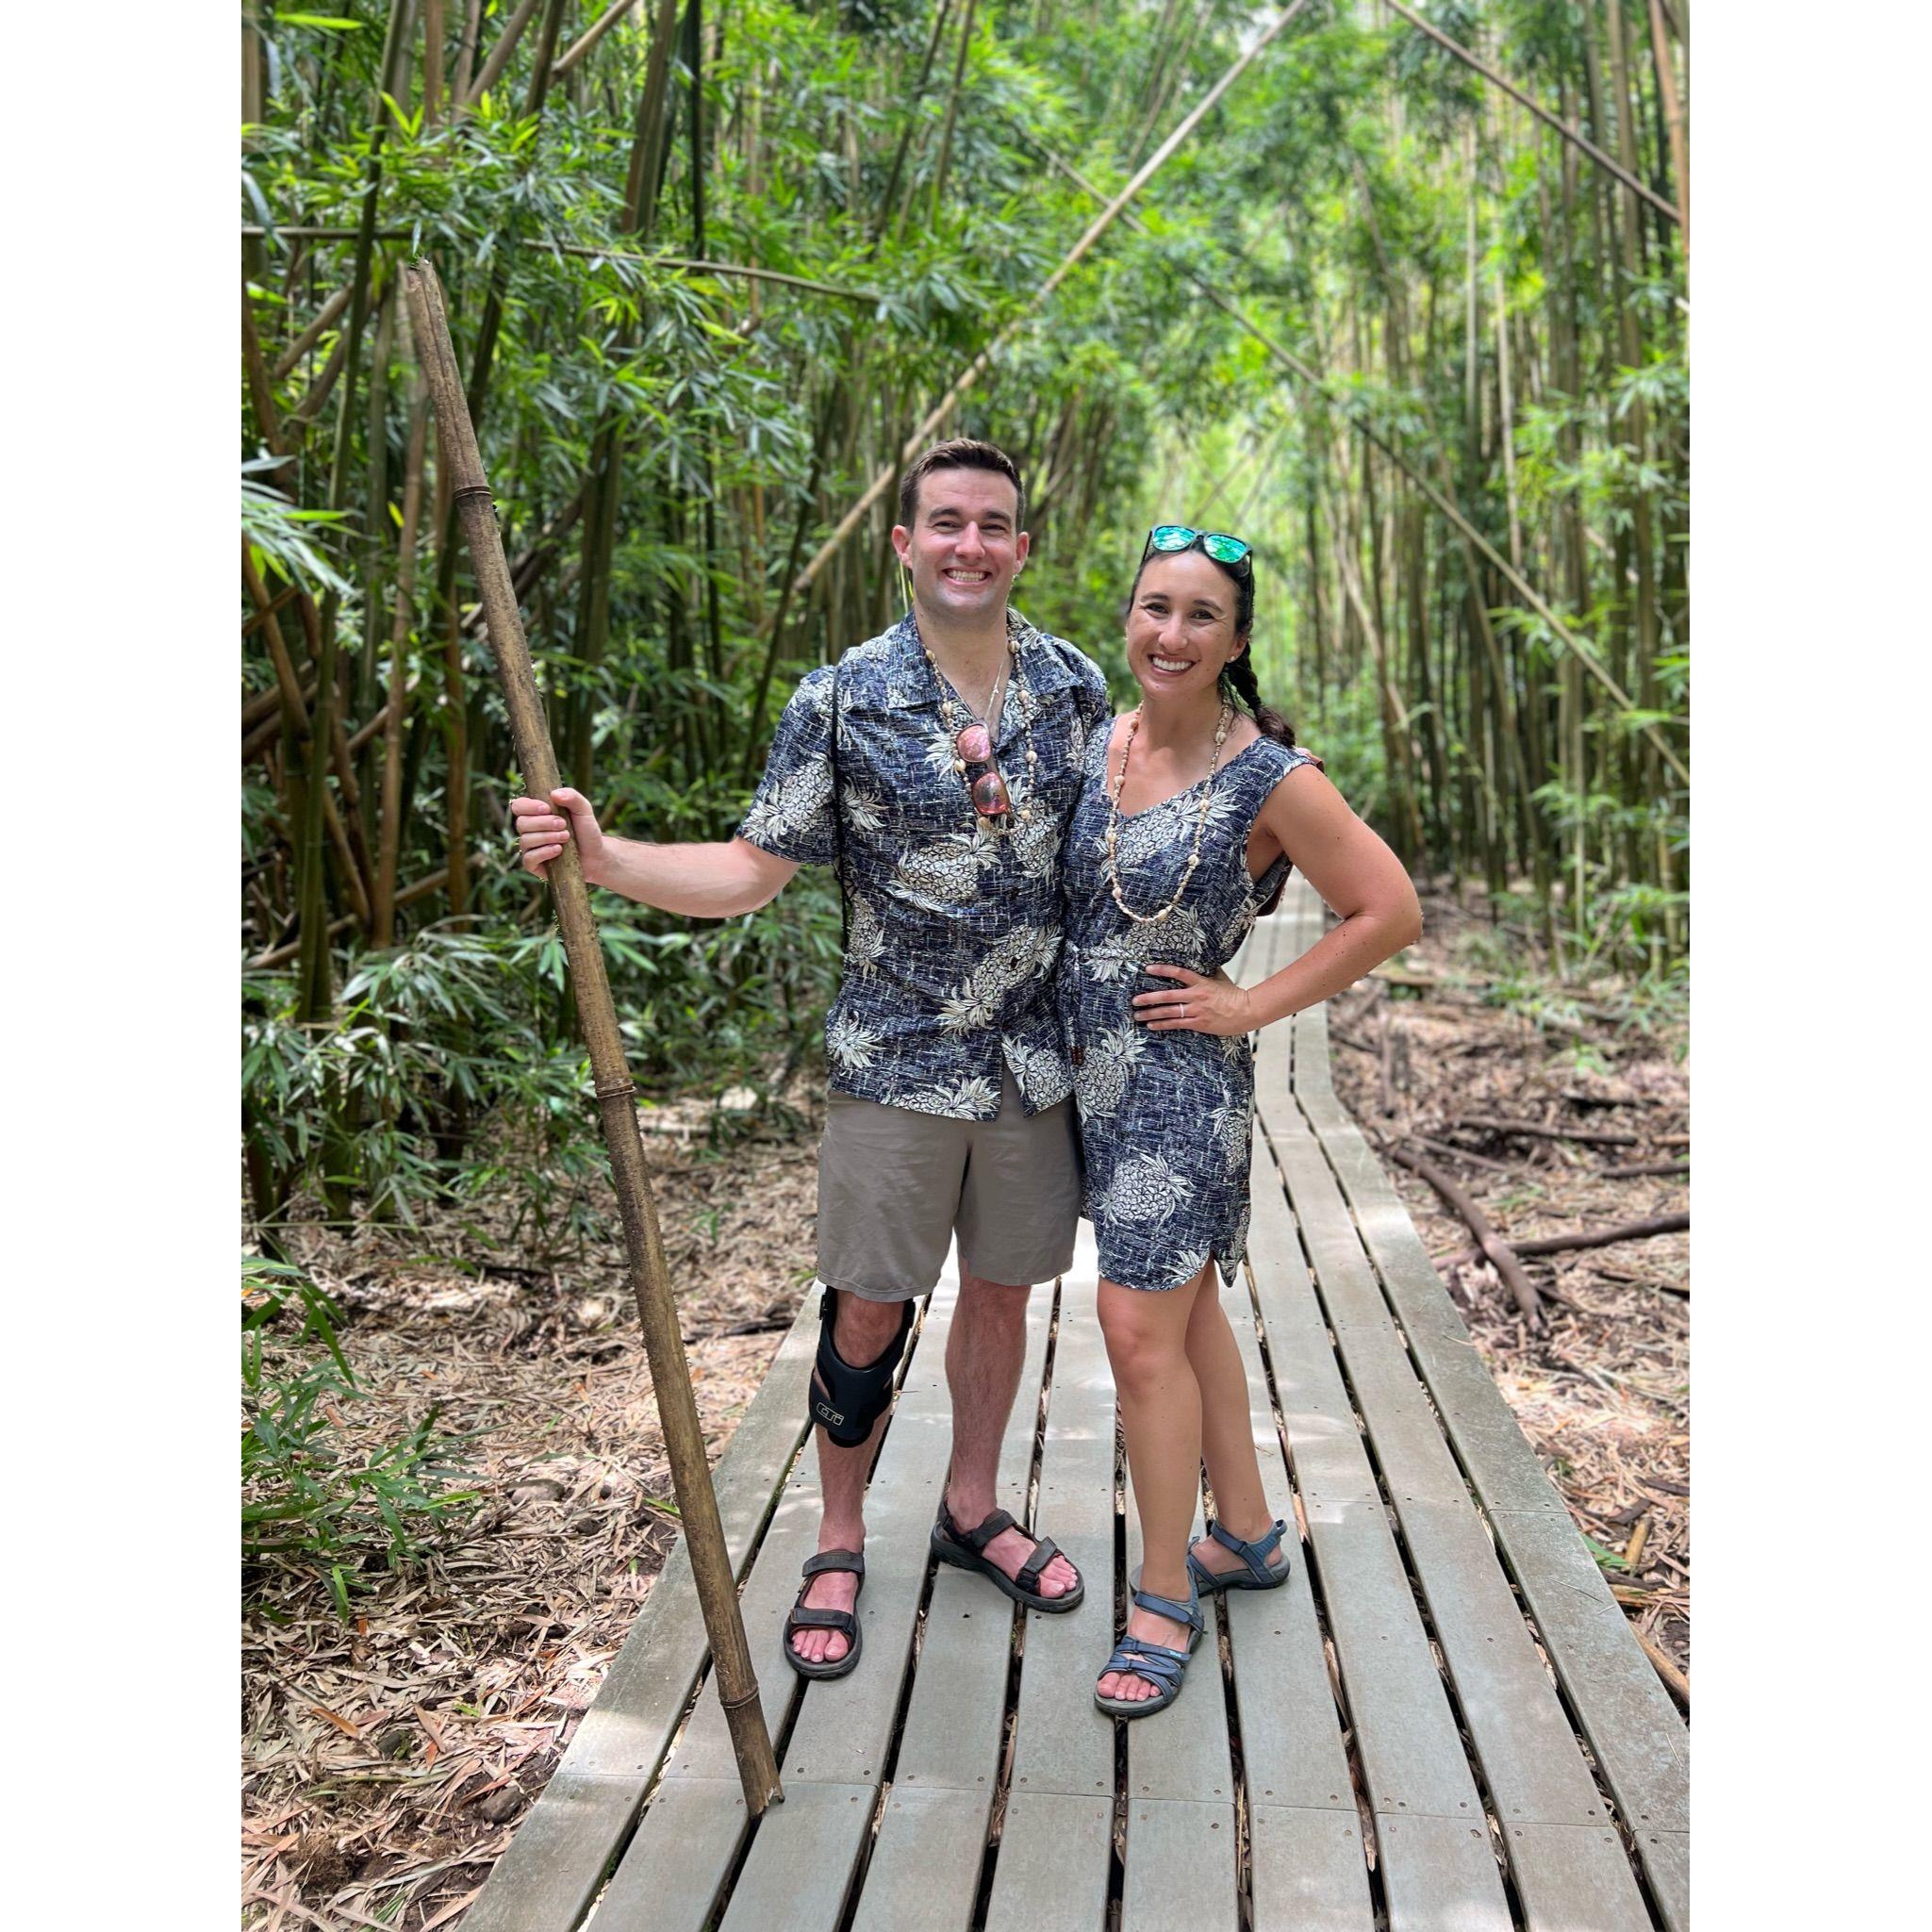 Matching outfits in the Haleakala National Park bamboo forest.